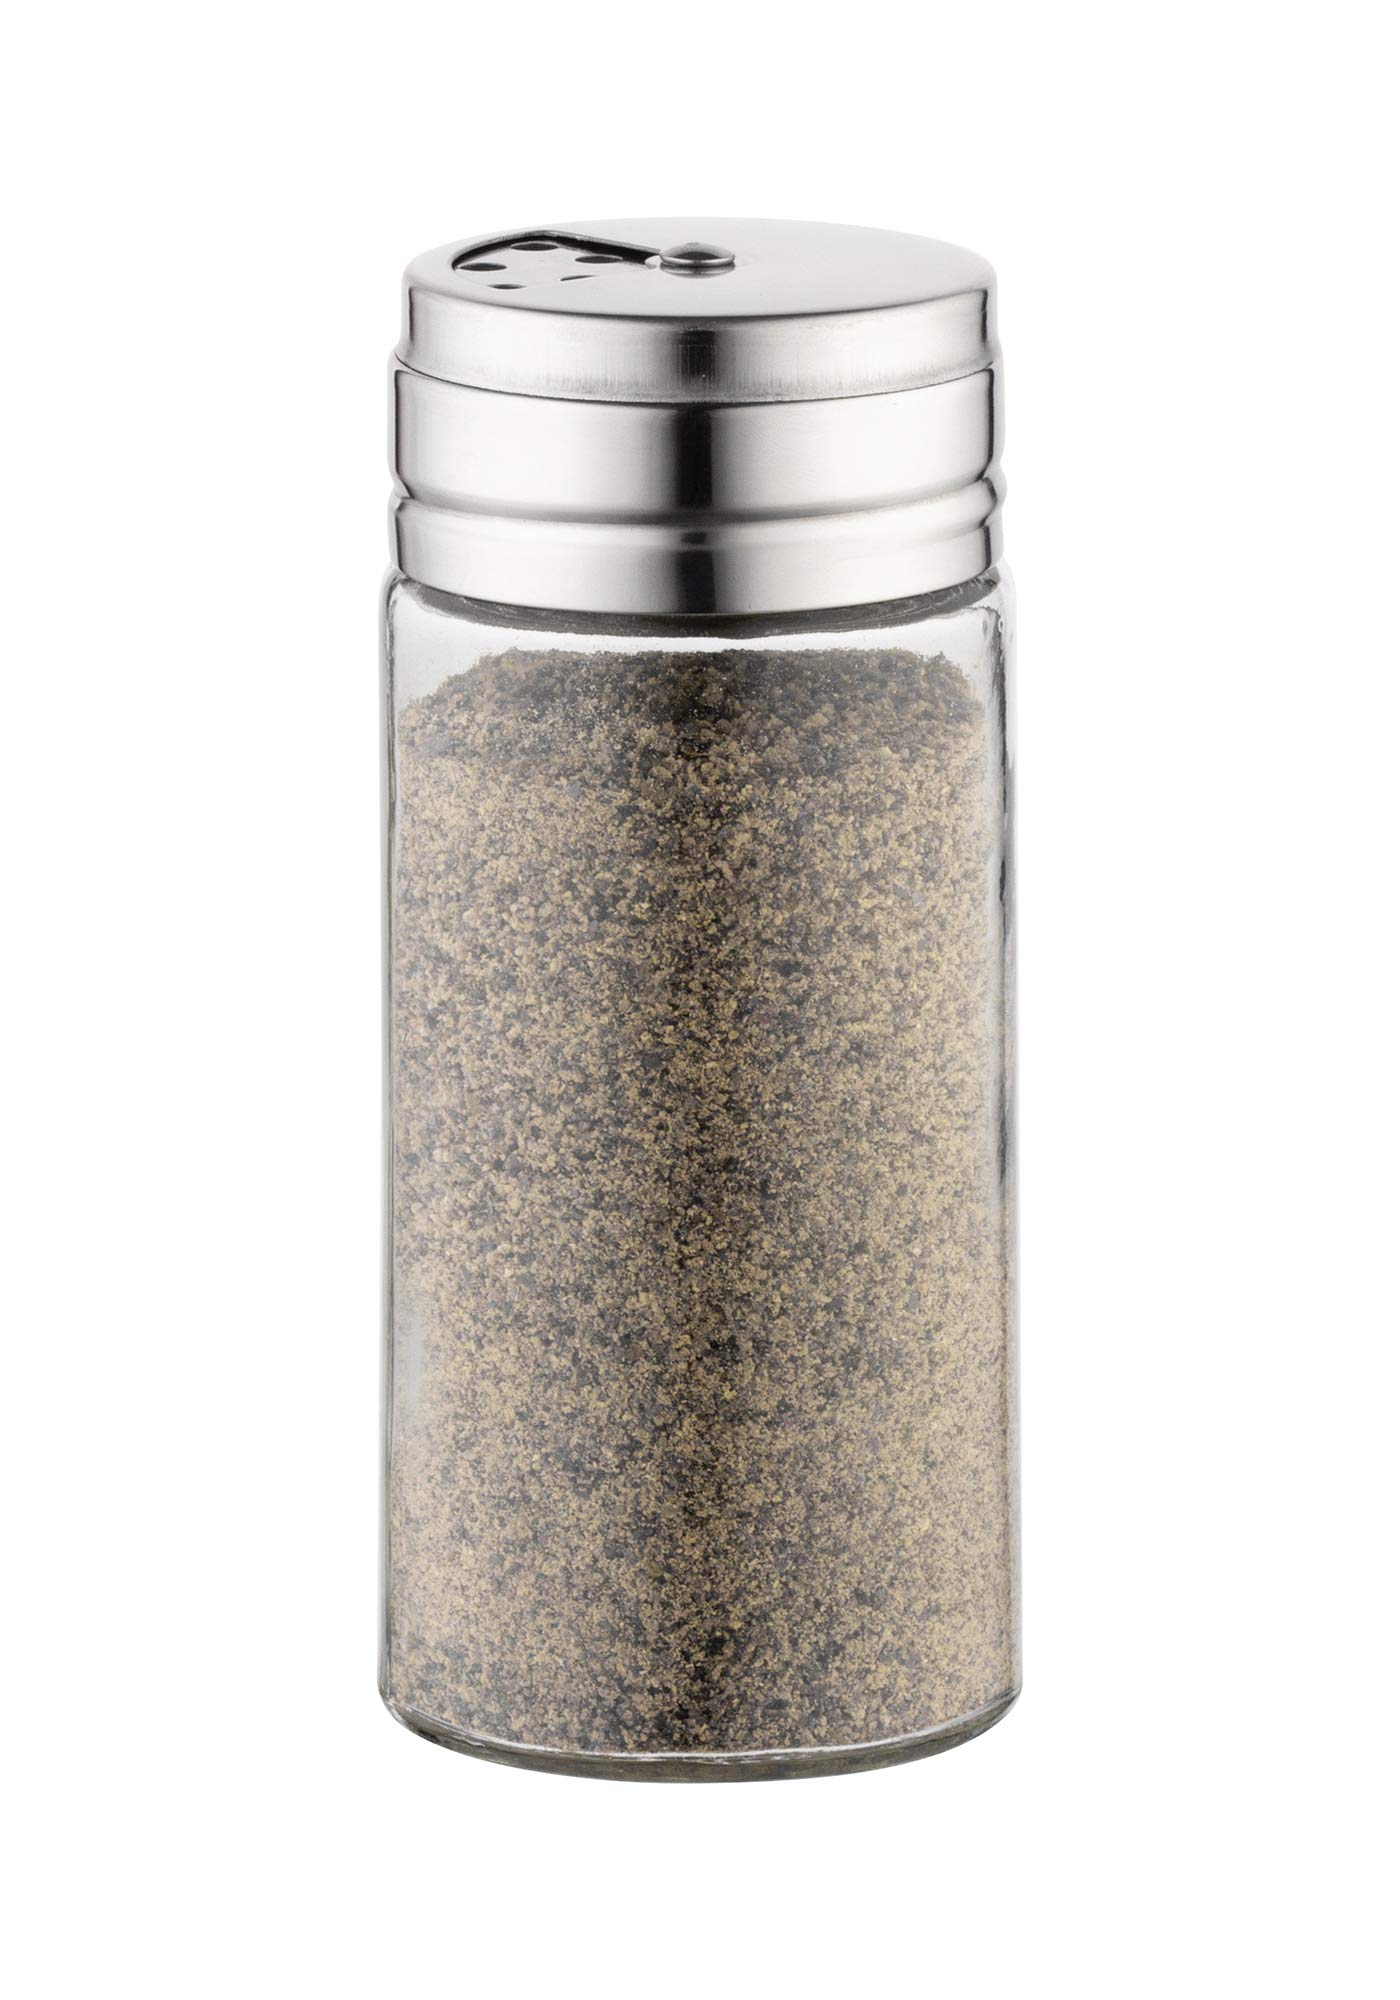 Fox Run 5167 Glass Spice Jar with Stainless Steel Shaker Lid, 6 Ounce, Clear Container for Seasonings